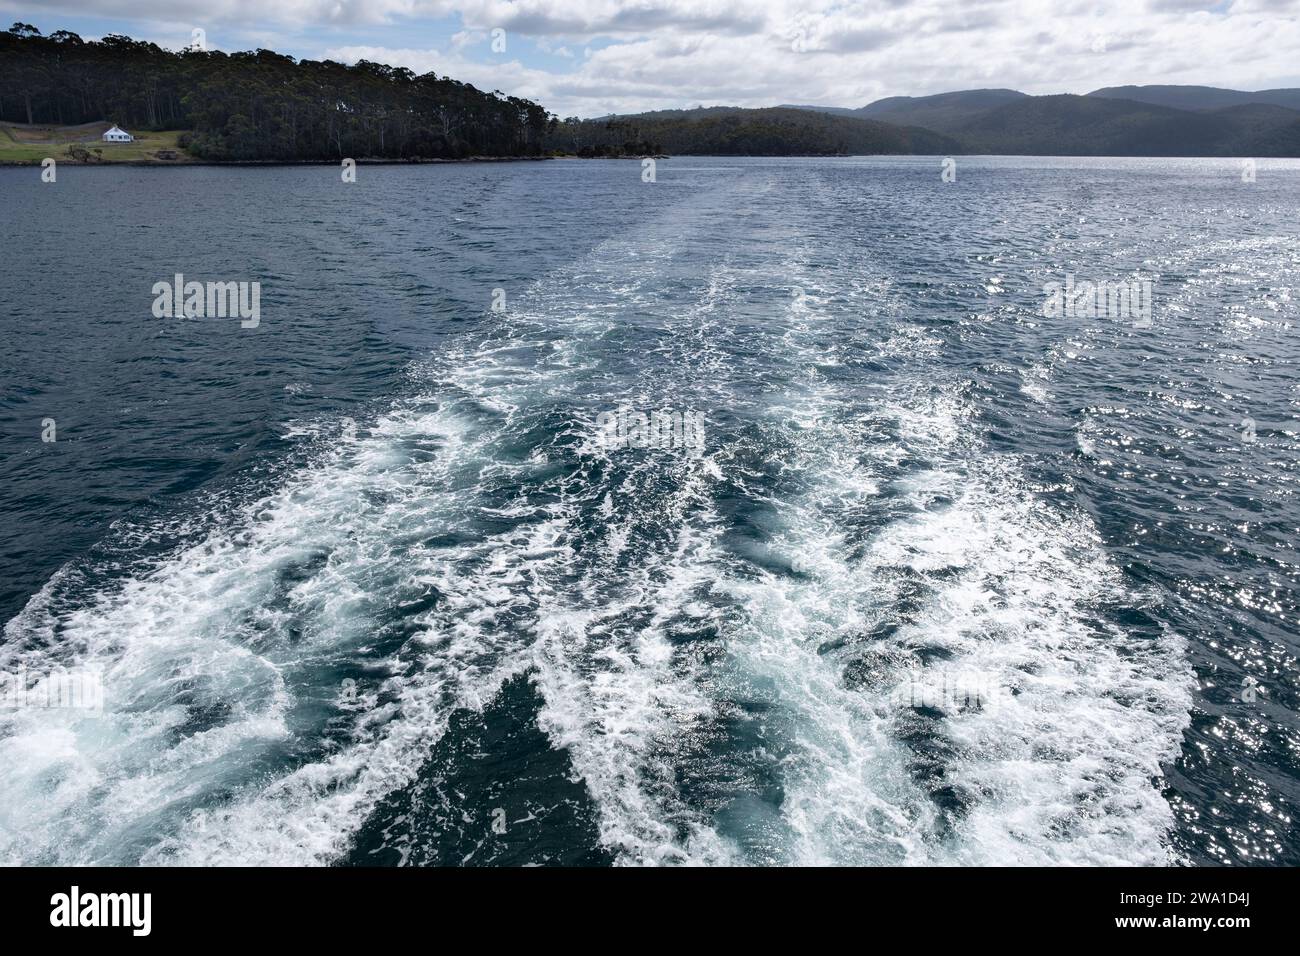 Stern waves from a boat sailing across Carnavon Bay with the Master Shipwright's House in the Port Arthur Penal Colony in Tasmania, Australia Stock Photo